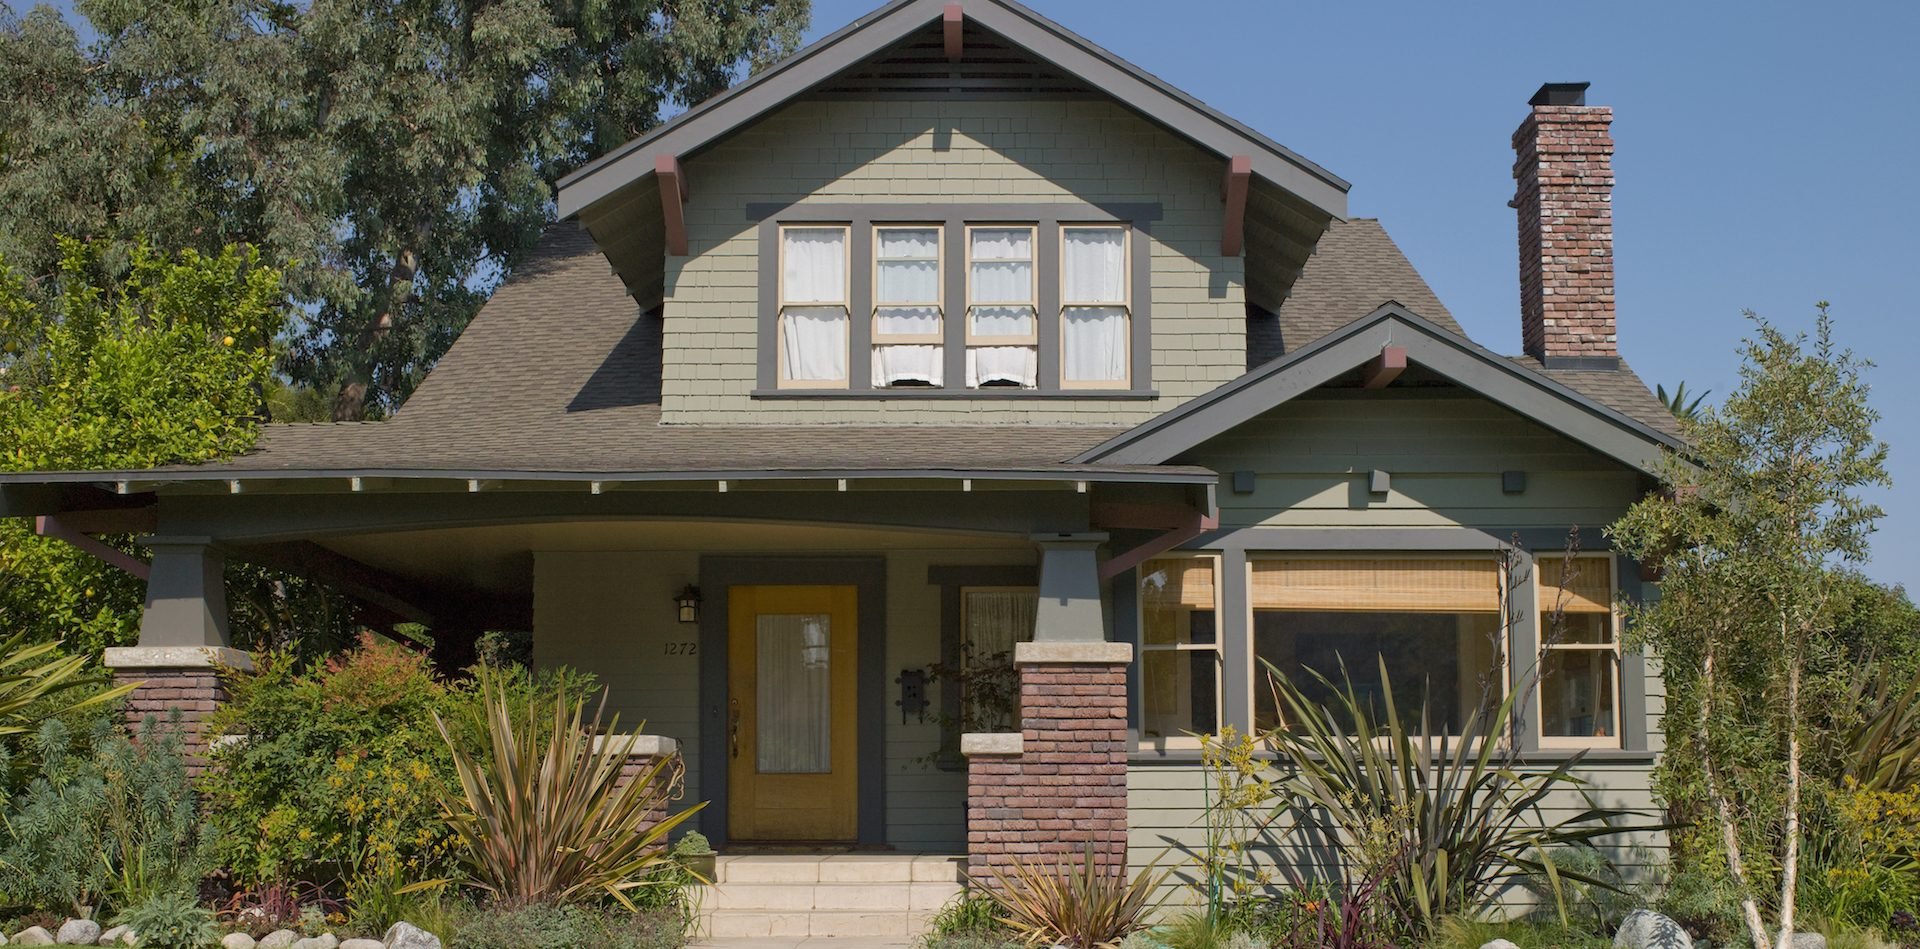 California First-Time Home Buyer Programs of 2023 - NerdWallet